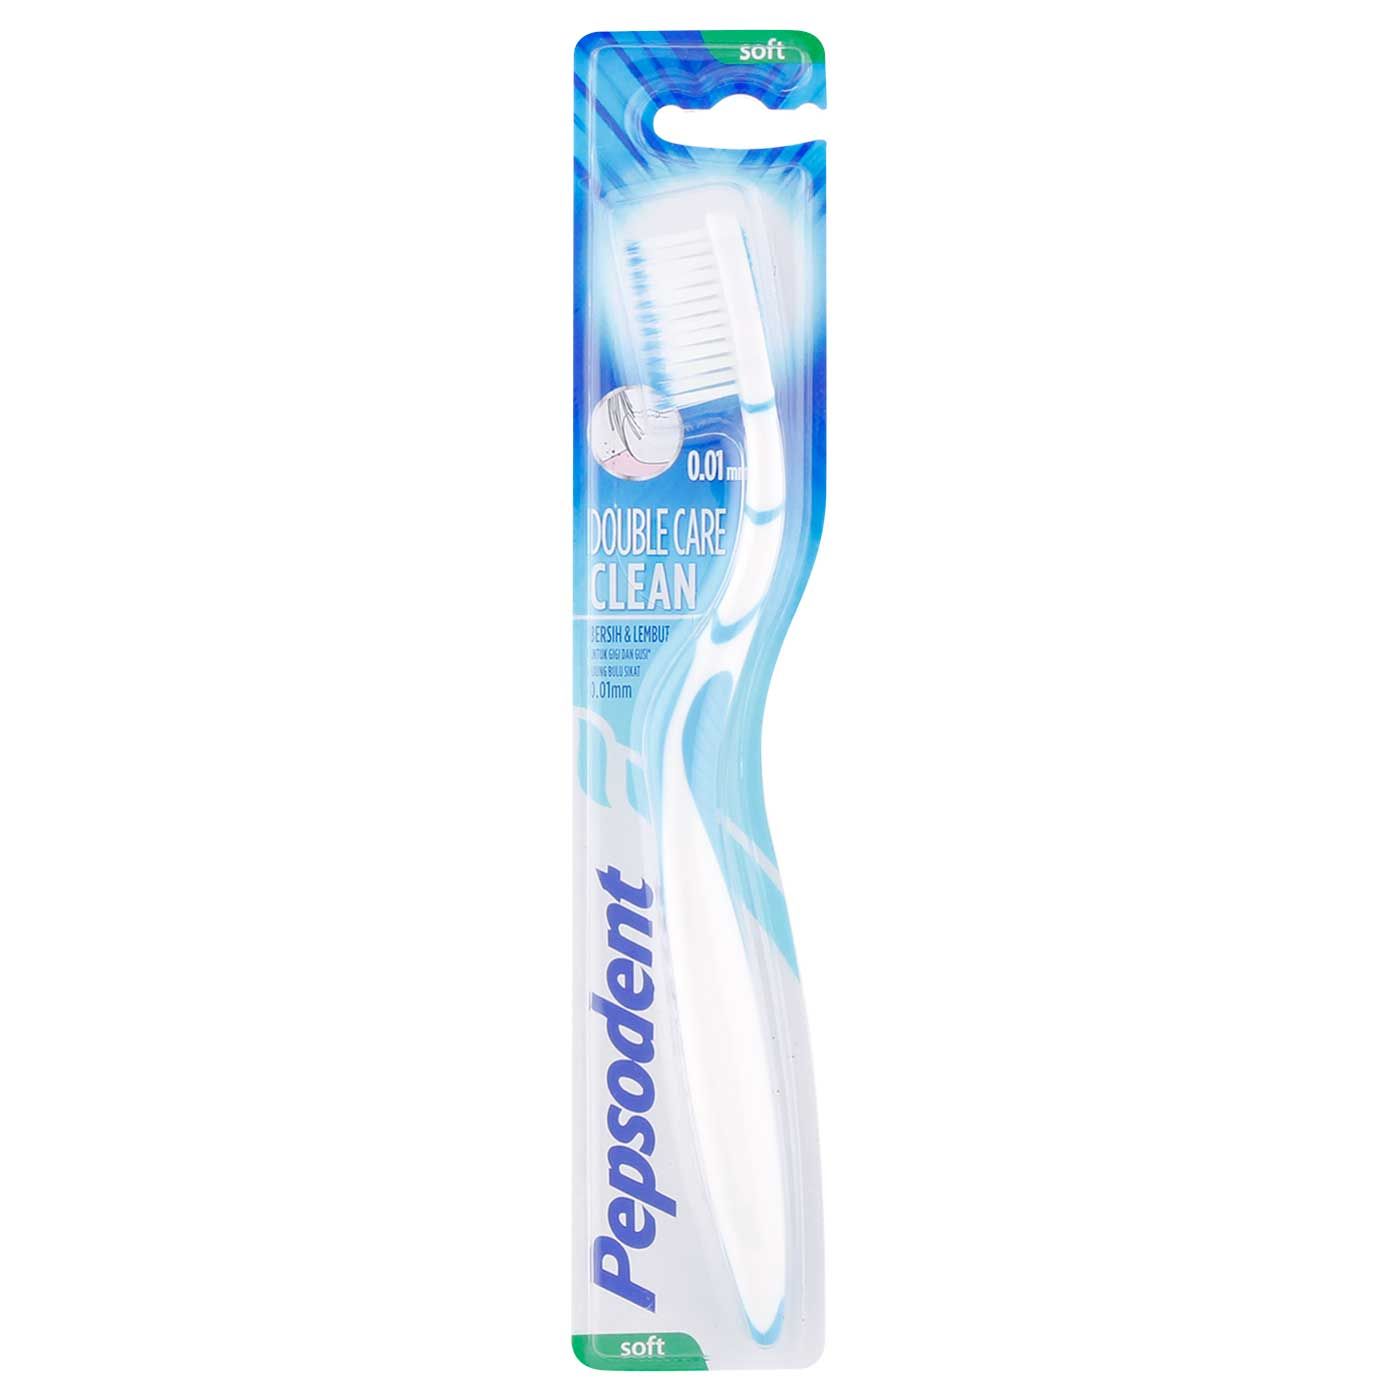 Pepsodent Tooth Brush Dbl Care Clean Soft Blue - 1